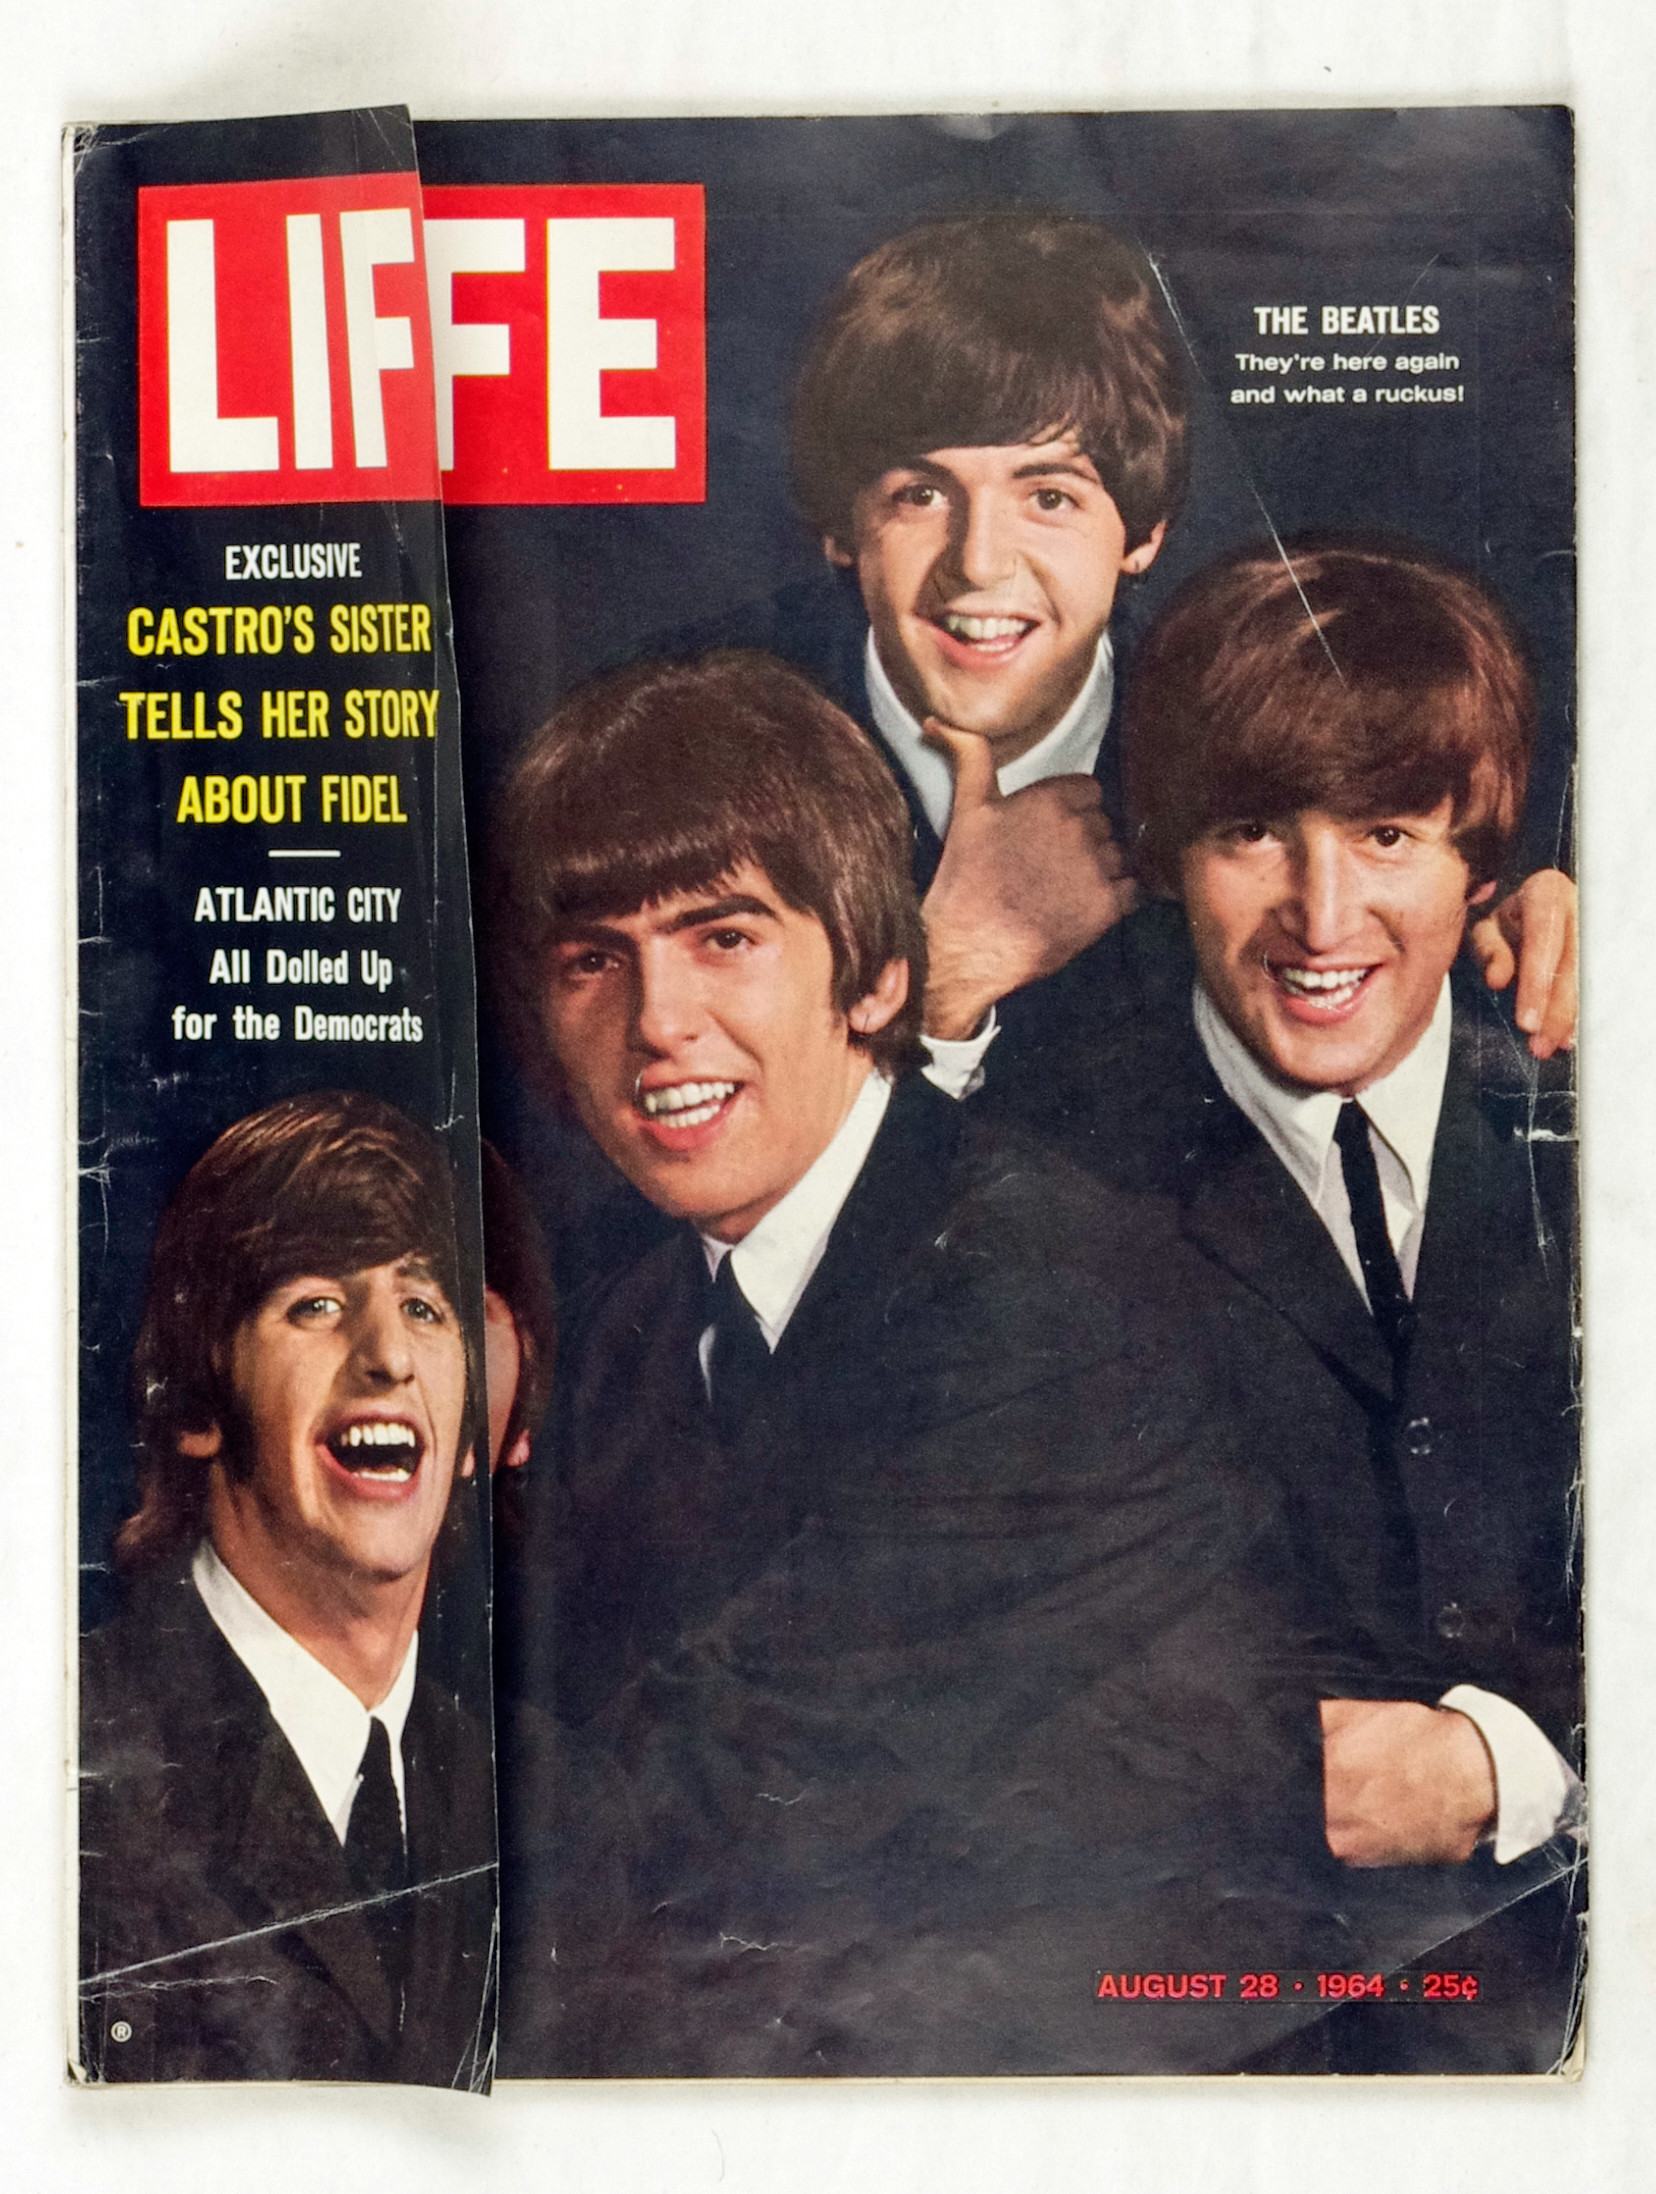 LIFE Magazine Back Issue 1964 August 28 The Beatles